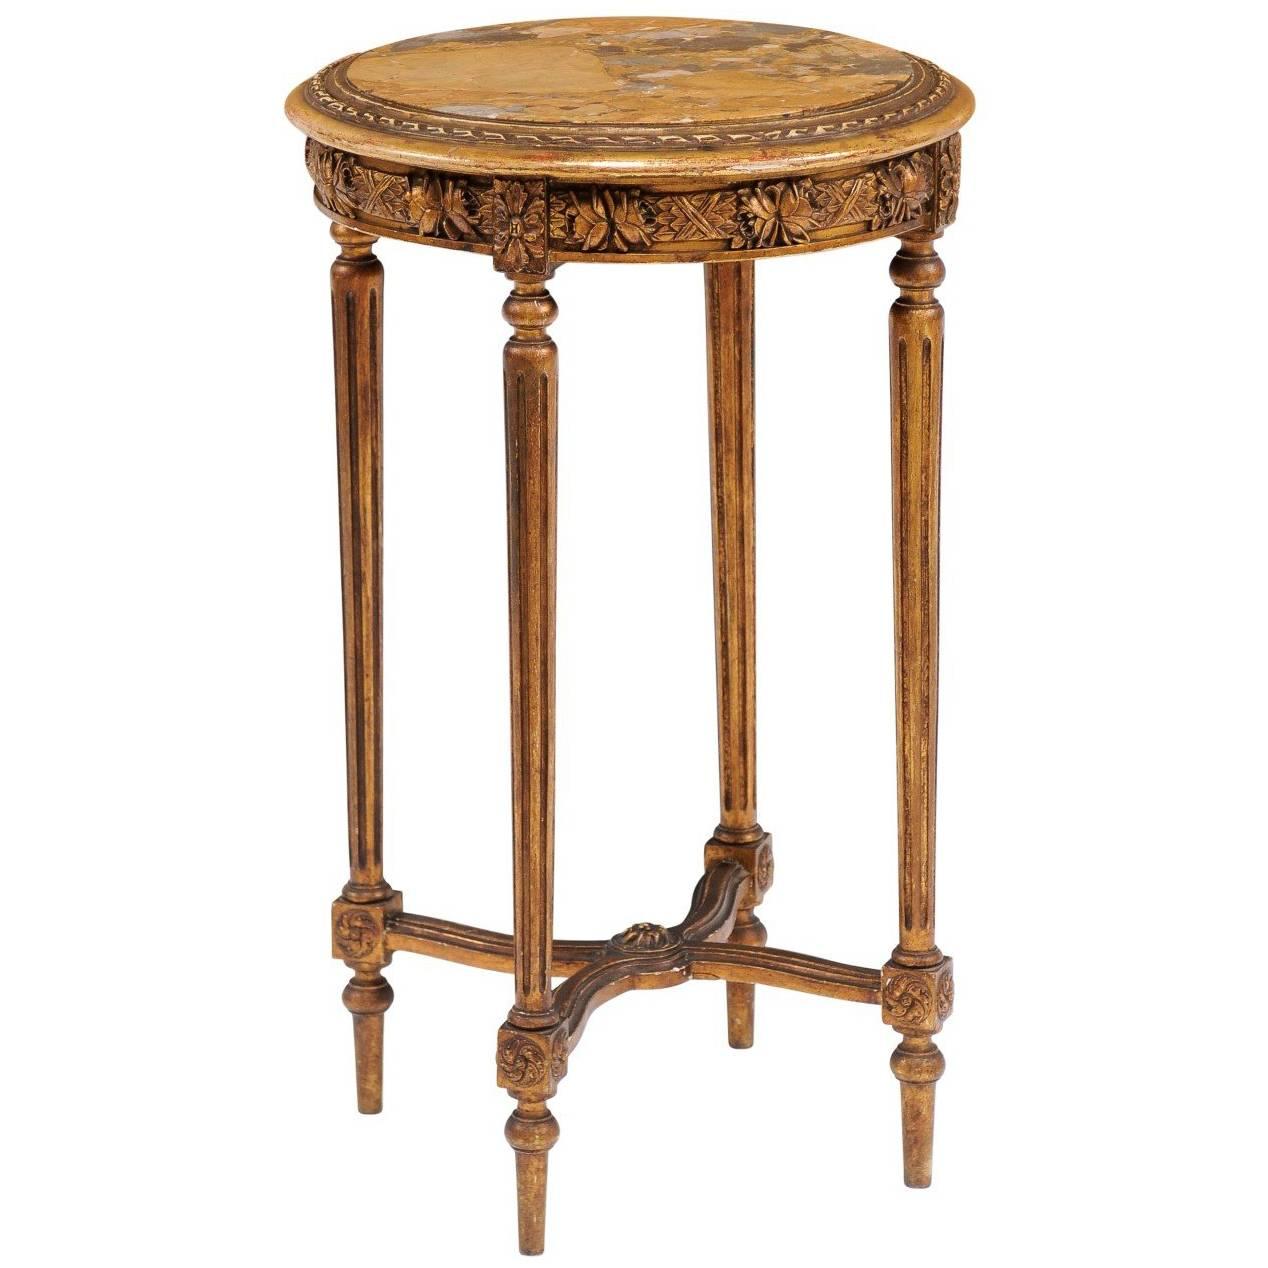 French 1930s Neoclassical Style Gilded Guéridon Table with Variegated Marble Top